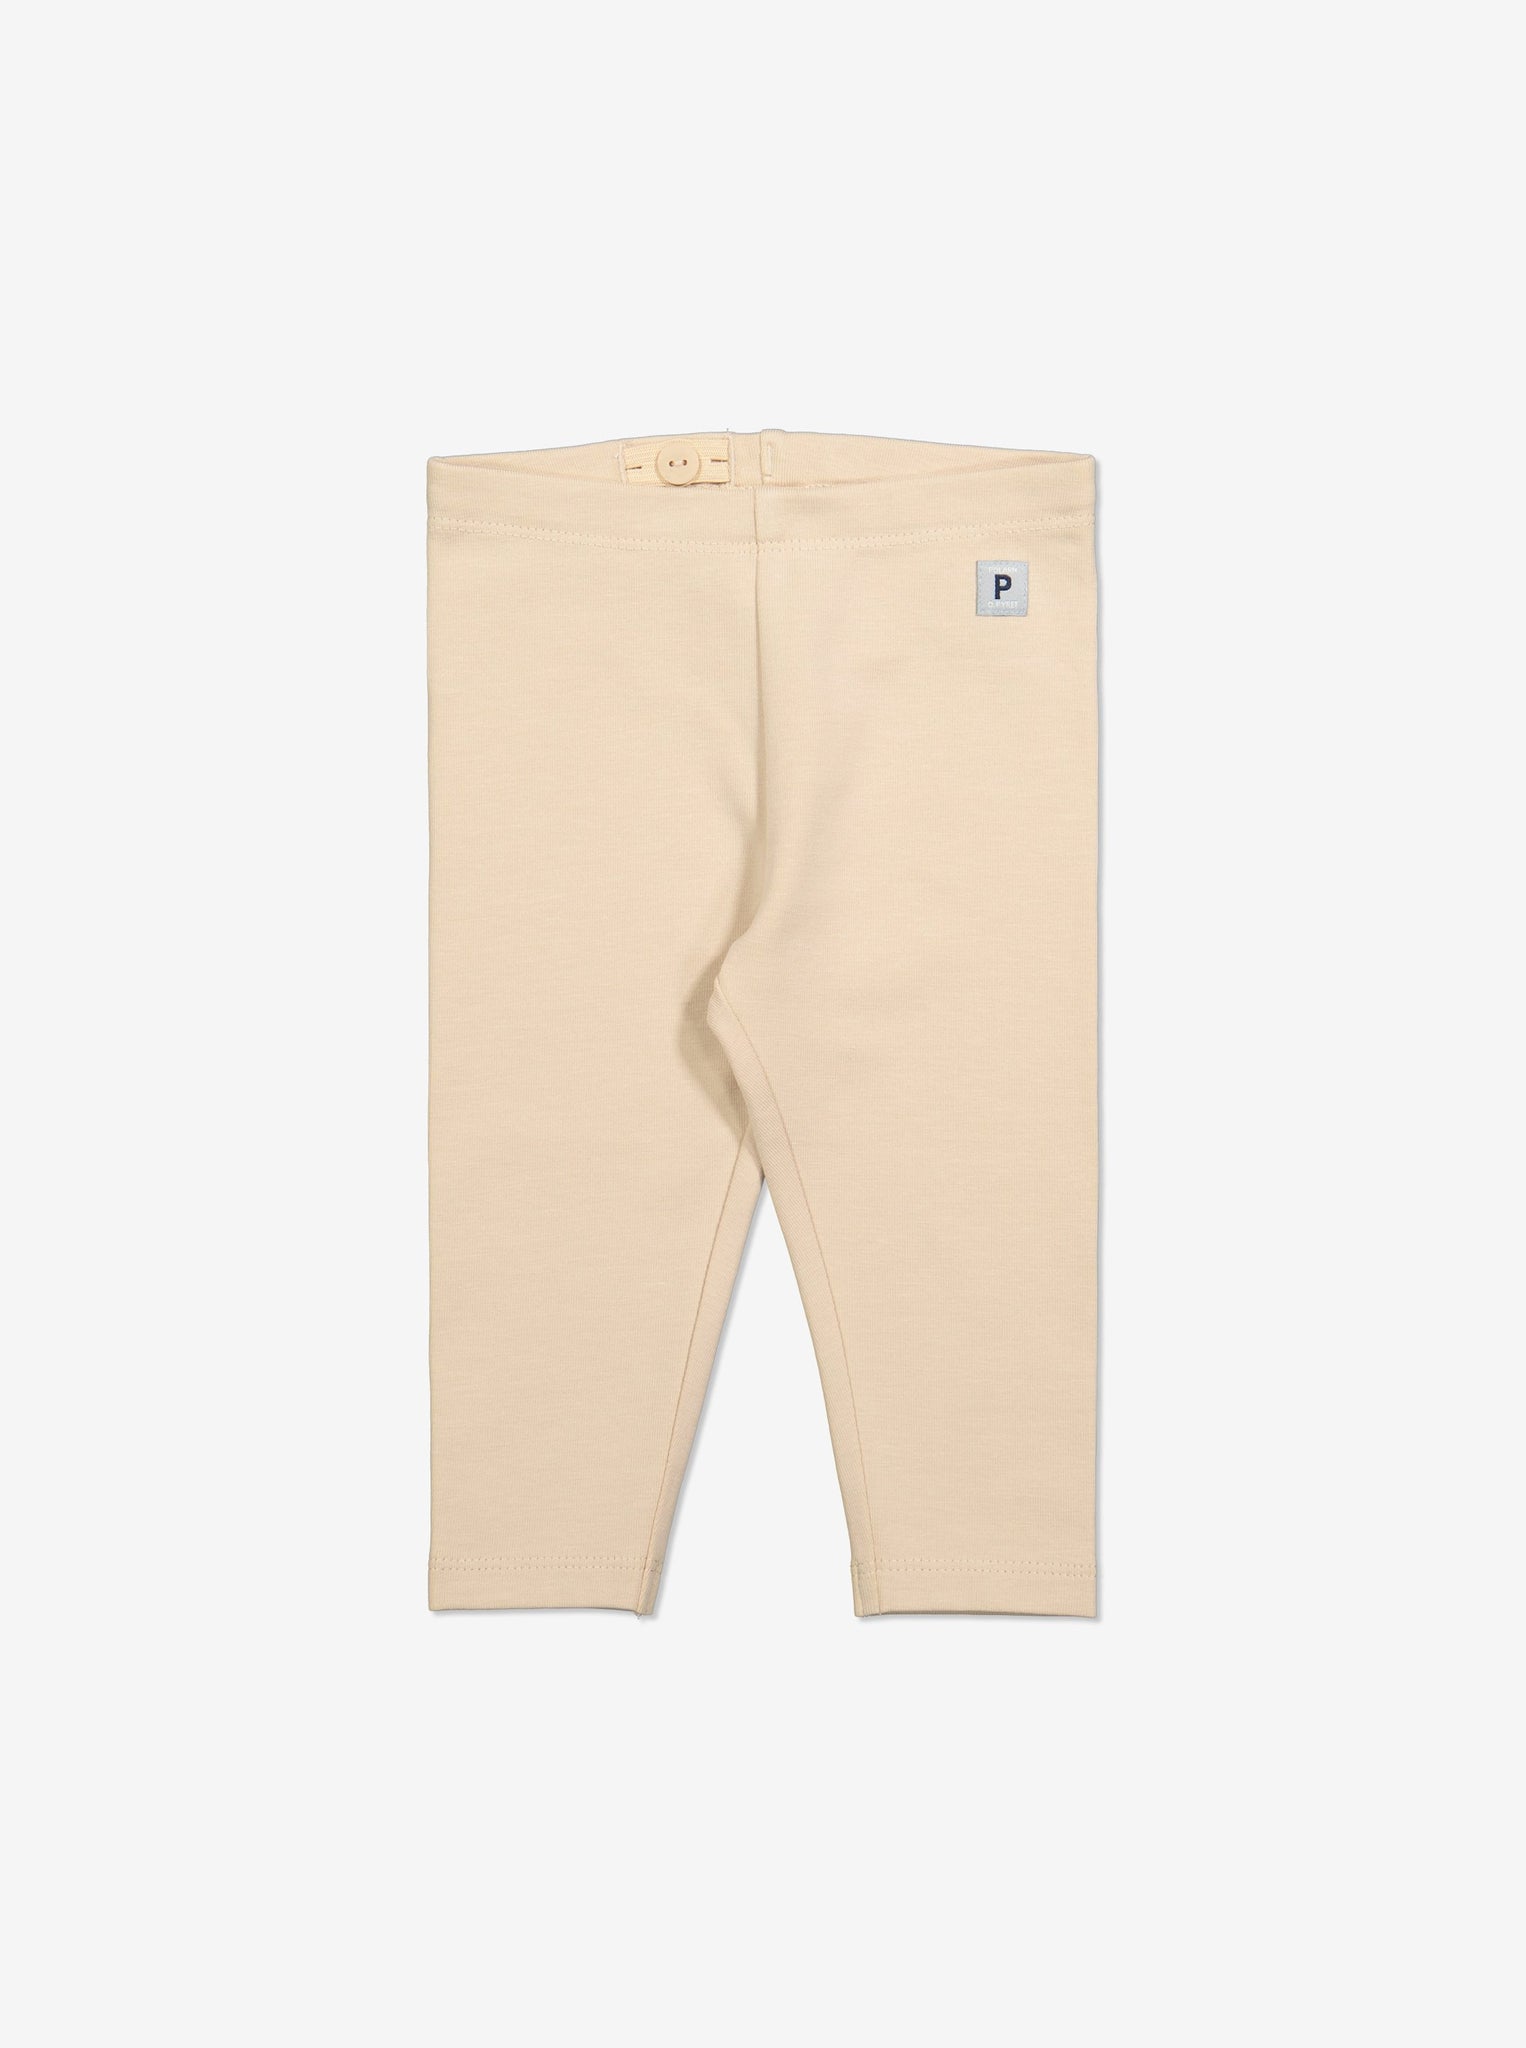  Organic Cotton Beige Baby Leggings from Polarn O. Pyret Kidswear. Made from sustainably sourced materials.